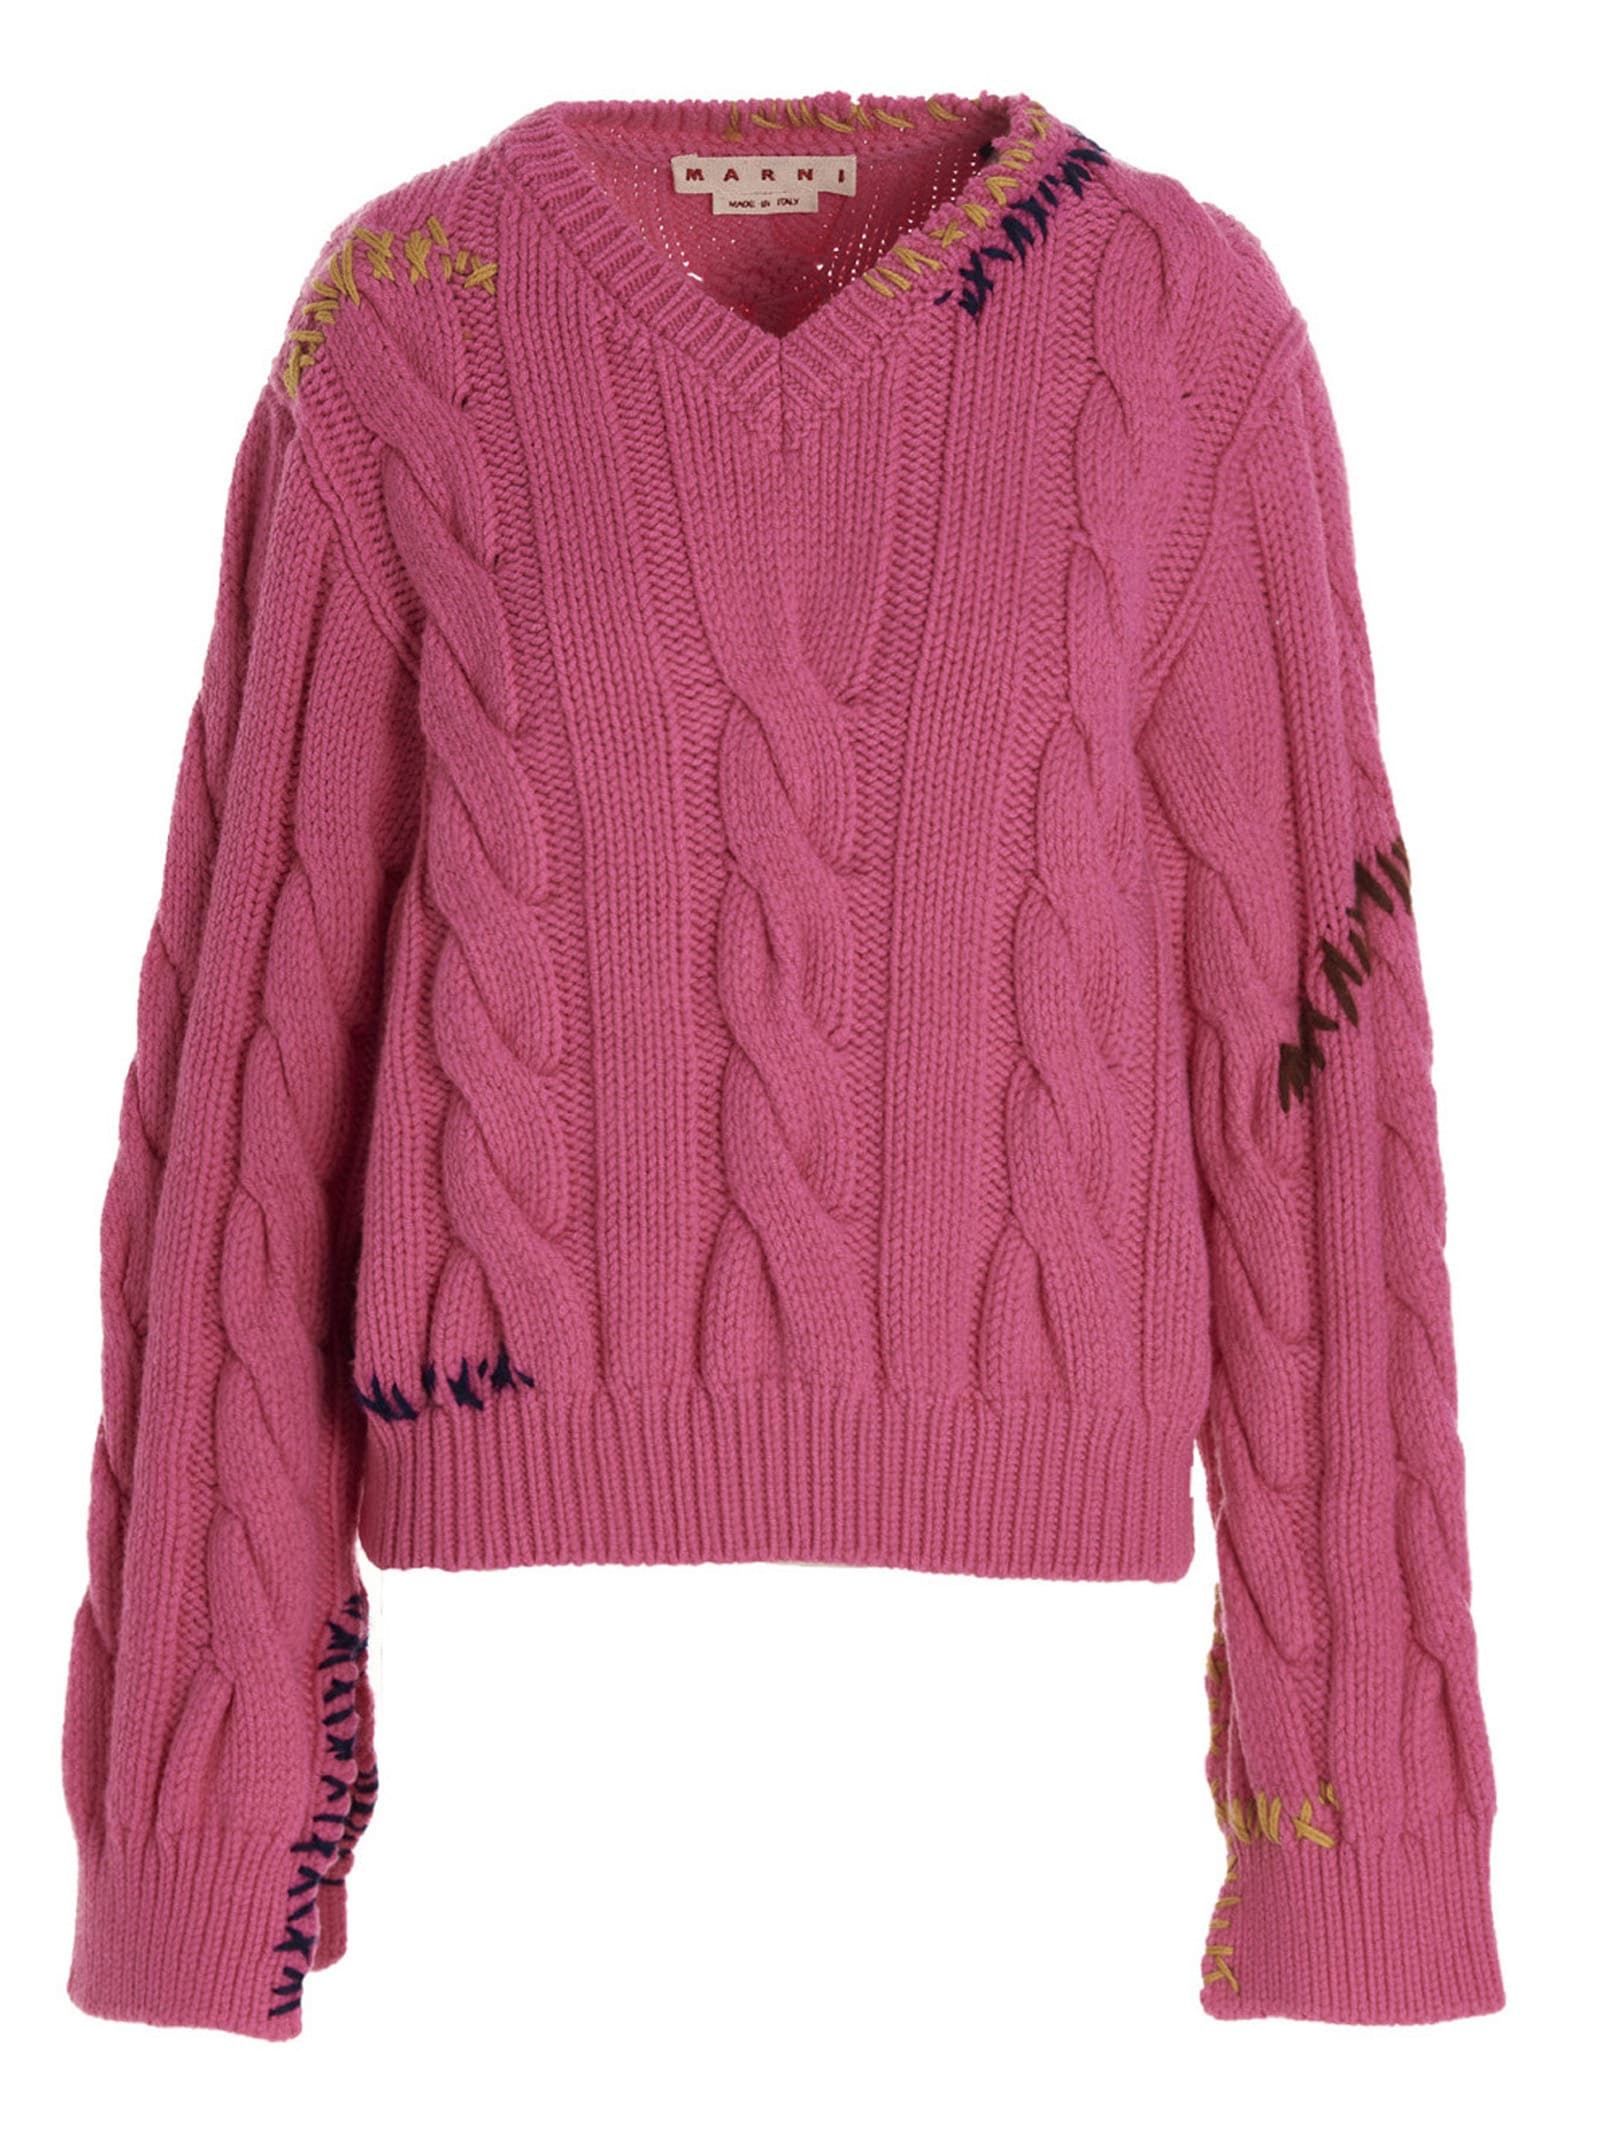 Marni Contrast Embroidery Sweater